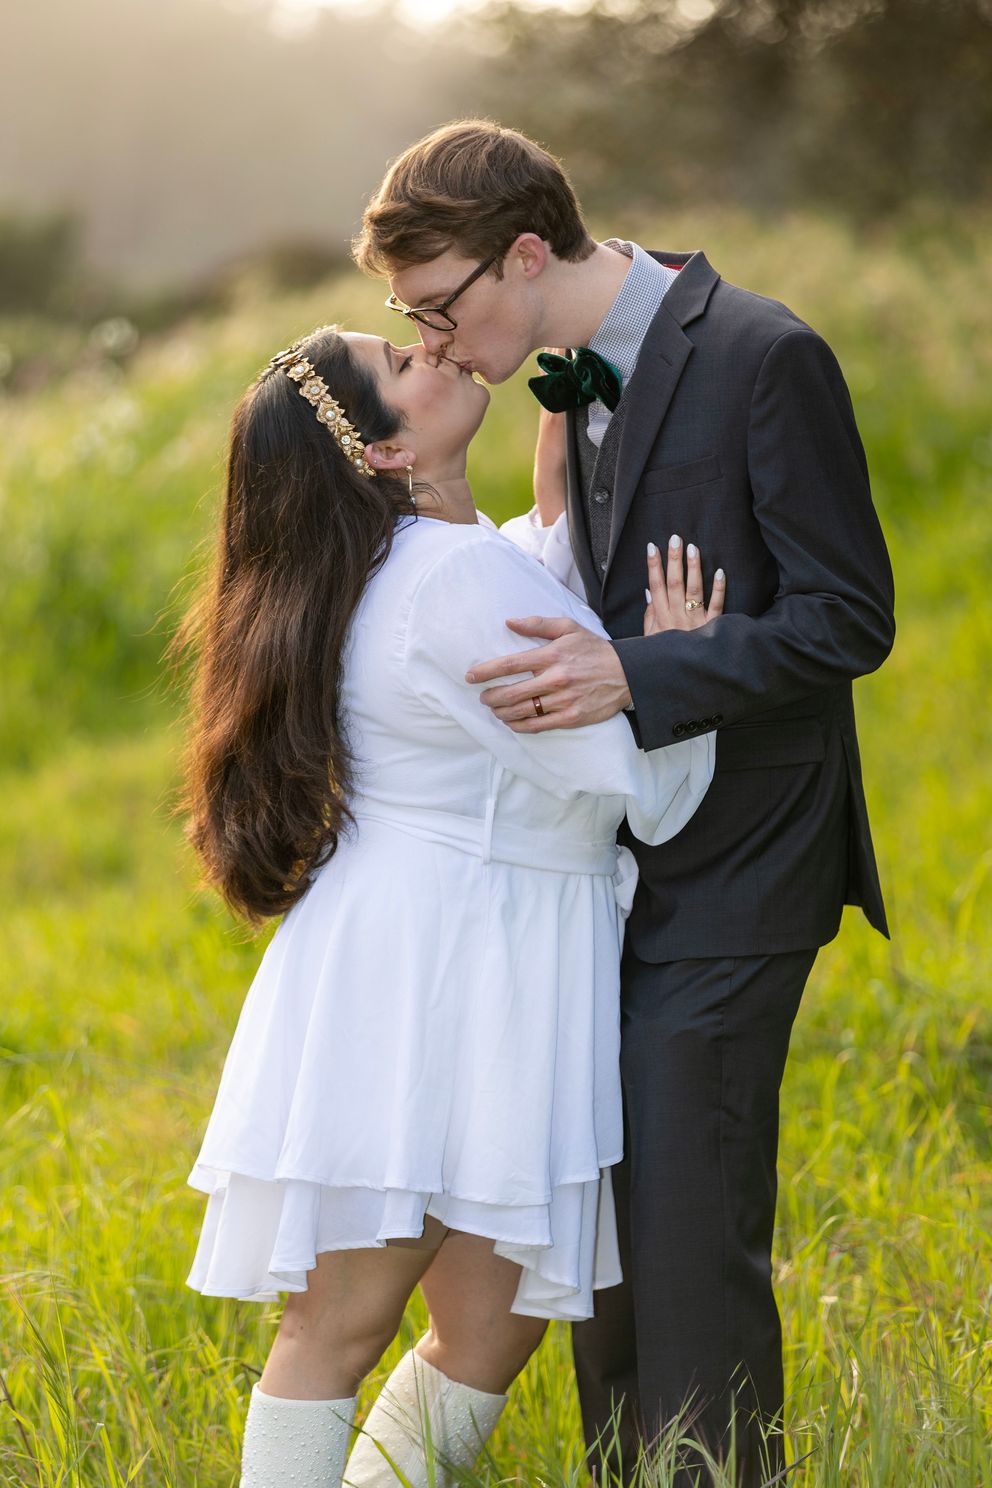 Wedding in Watsonville. This was during sunset session in a grass field. Reception photoshoot.